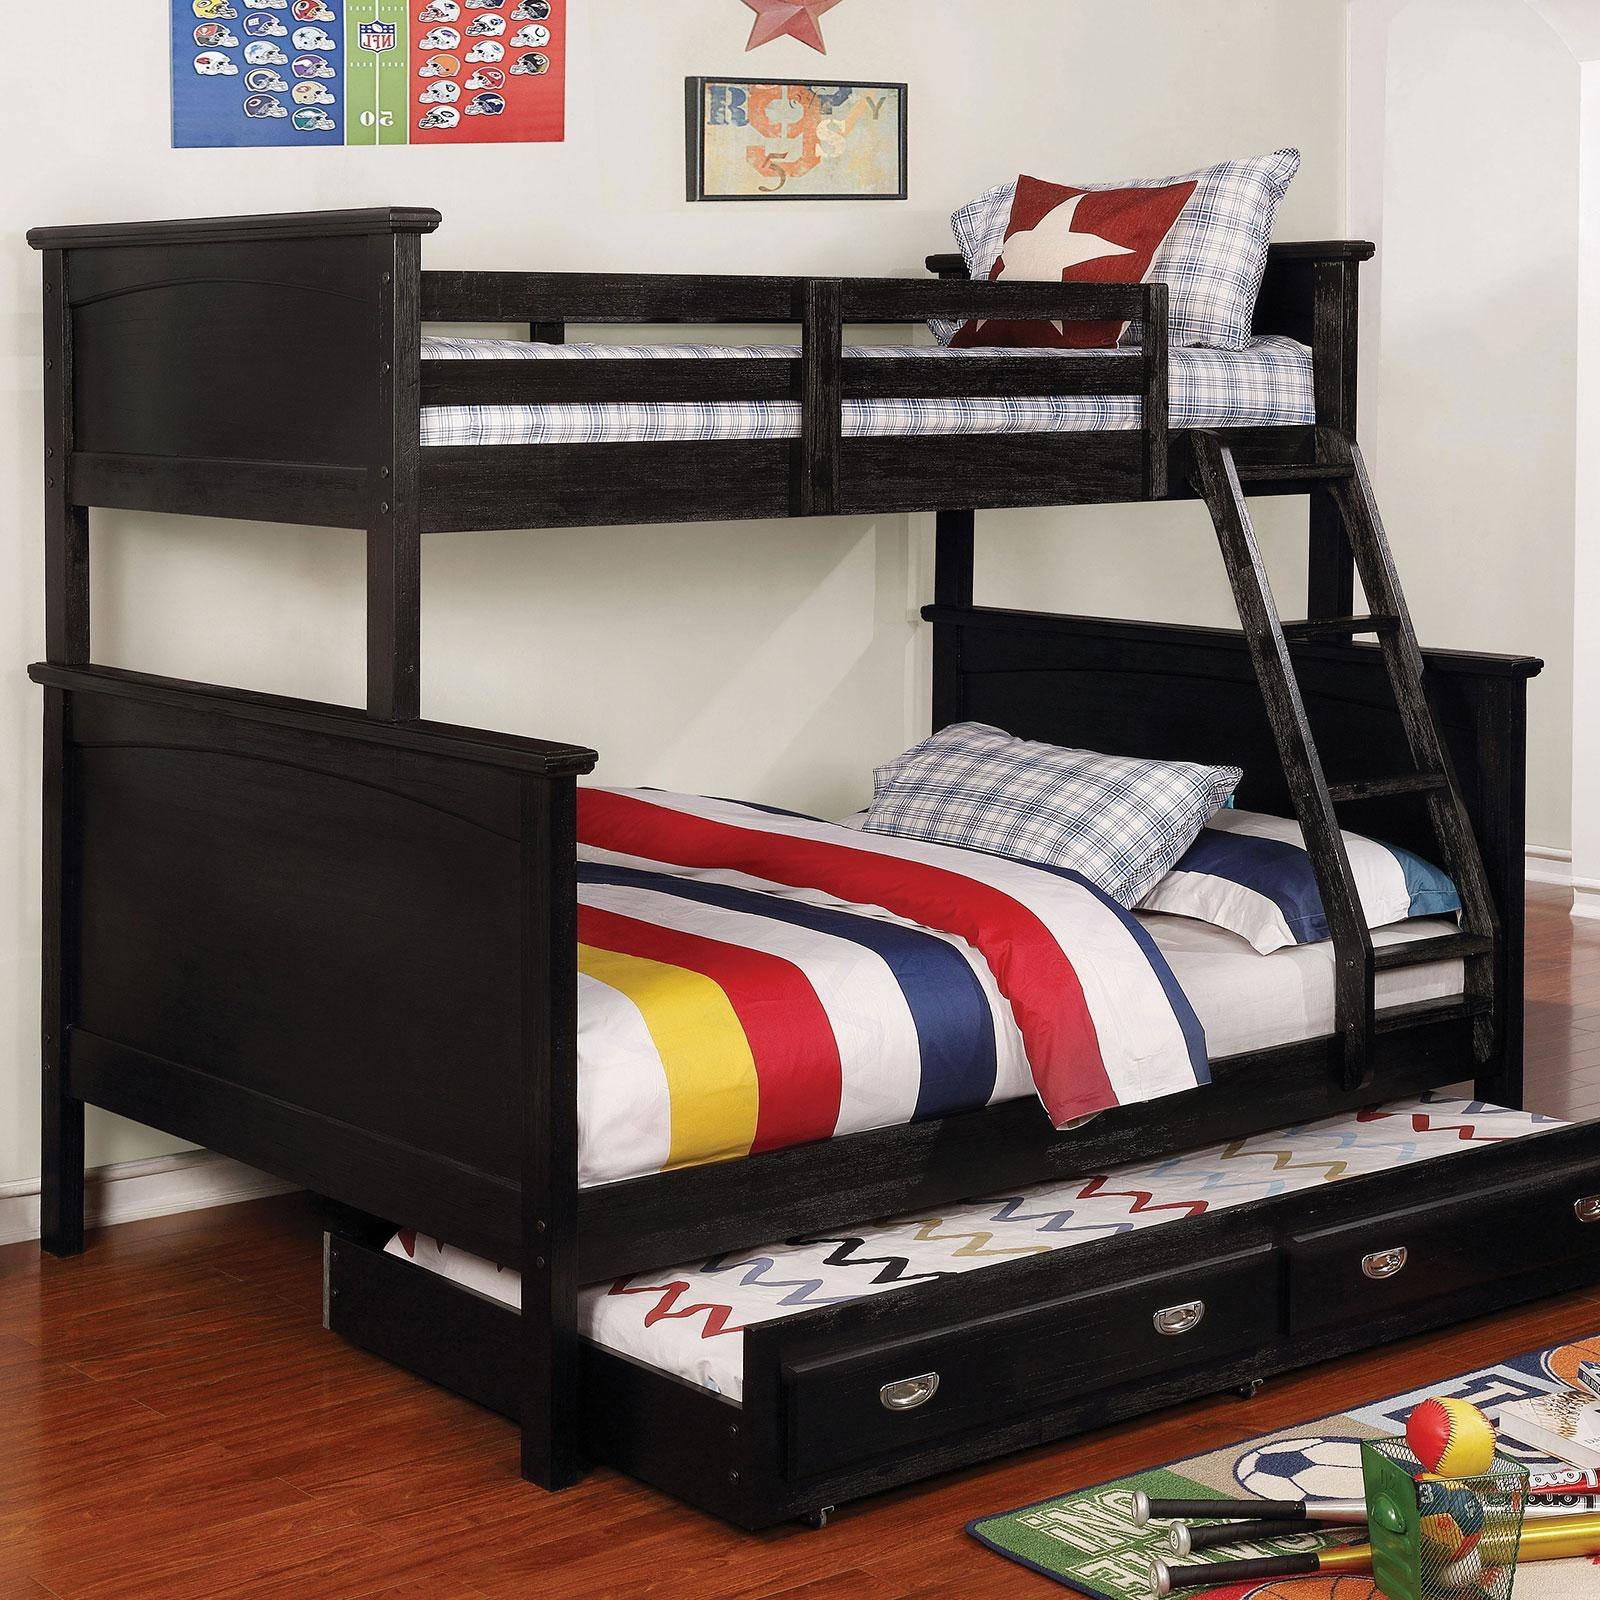 America Marci Twin Bunk Bed, Black Wooden Bunk Beds